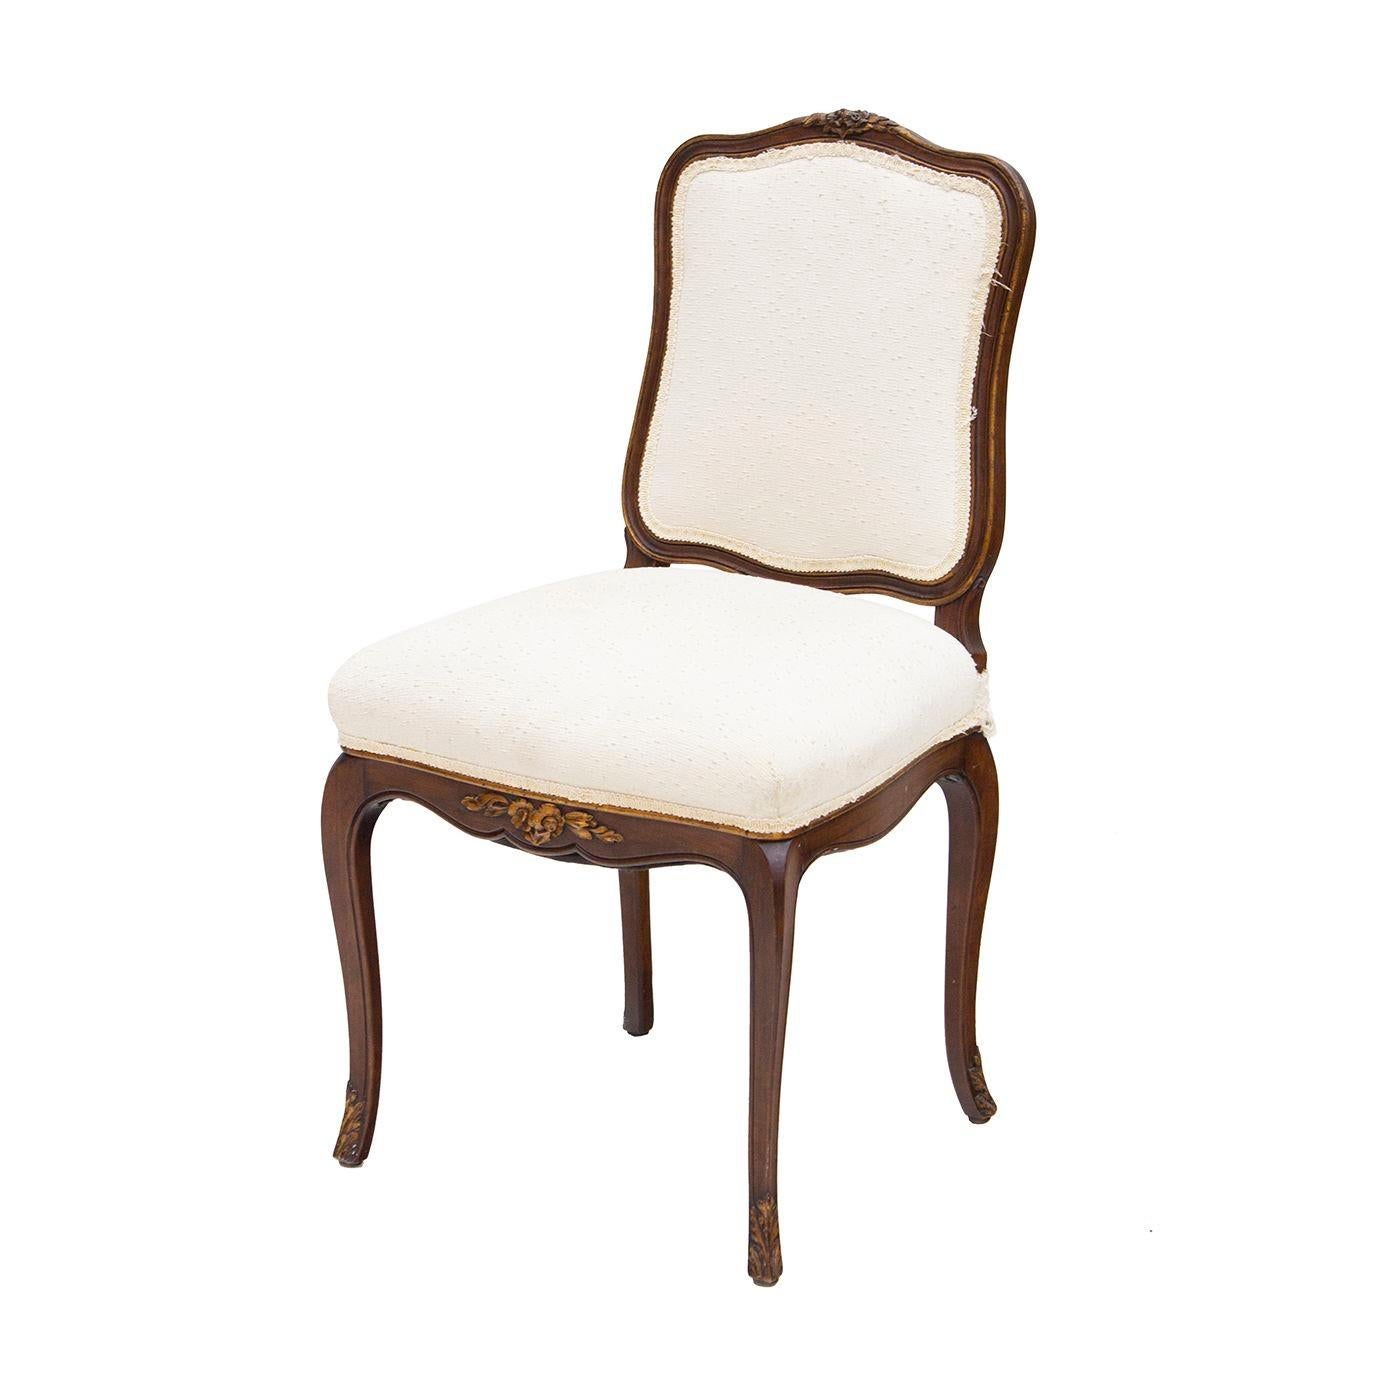 USA, 1960s
Sweet little French style side chair with nice carved detail to the frame. A really nice scale to this piece. It would be a great desk or side chair for a guest room. No maker's marks remain, likely Baker, Kindel, or Henredon.
CONDITION